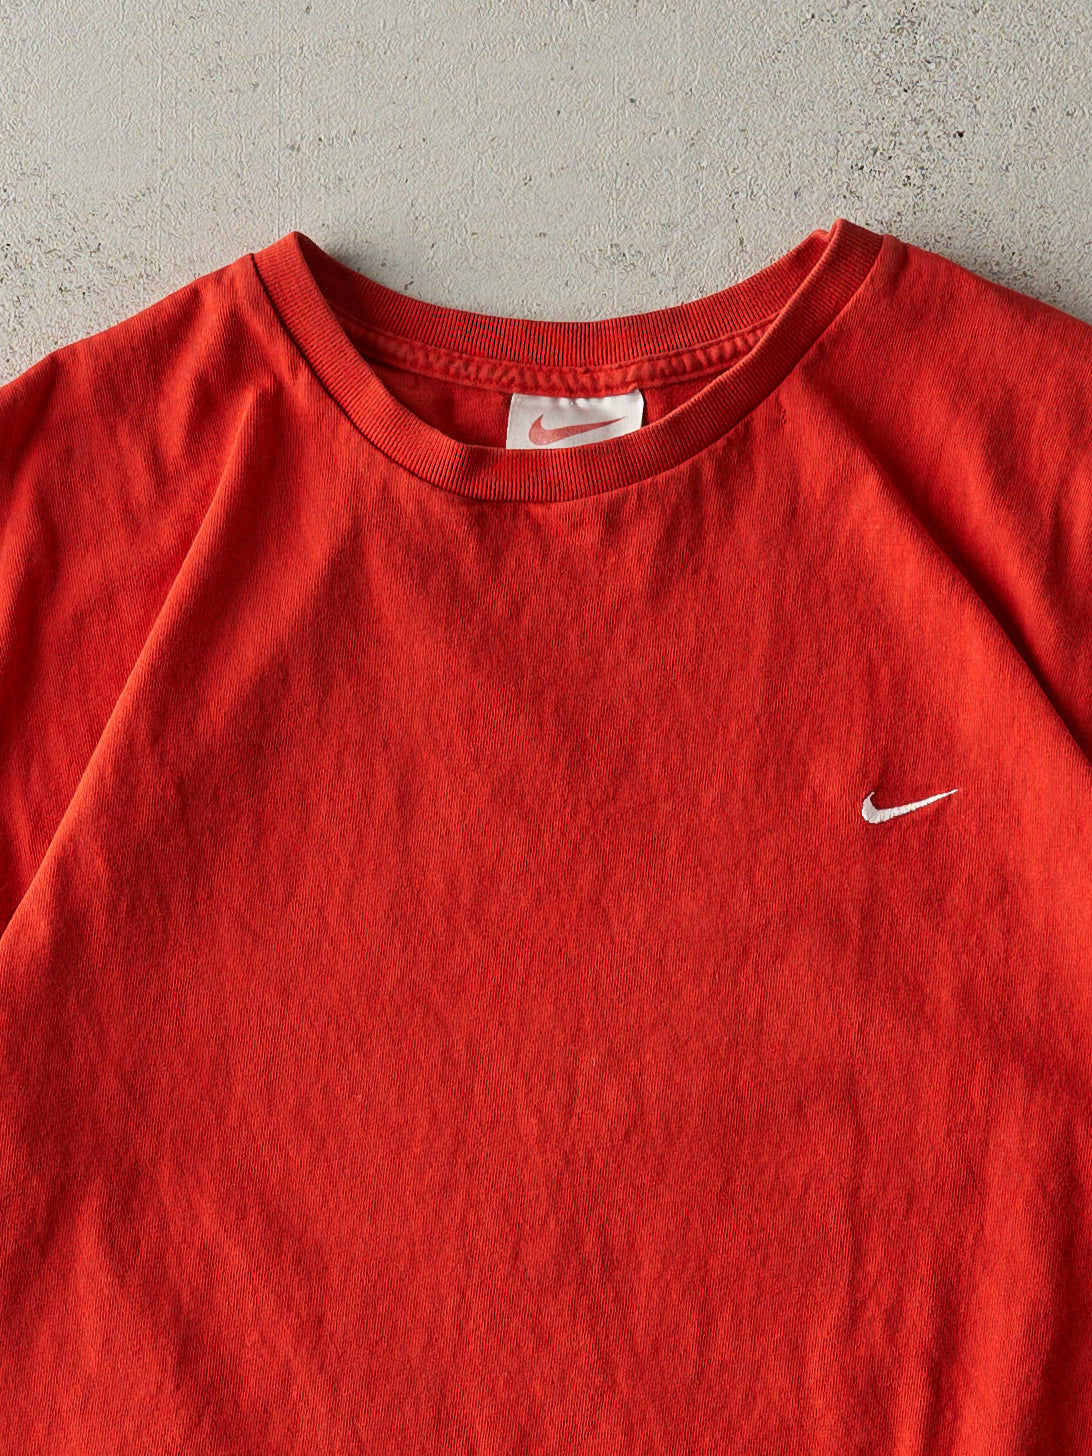 Vintage 90s Red Embroidered Nike Swoosh Tee (S)